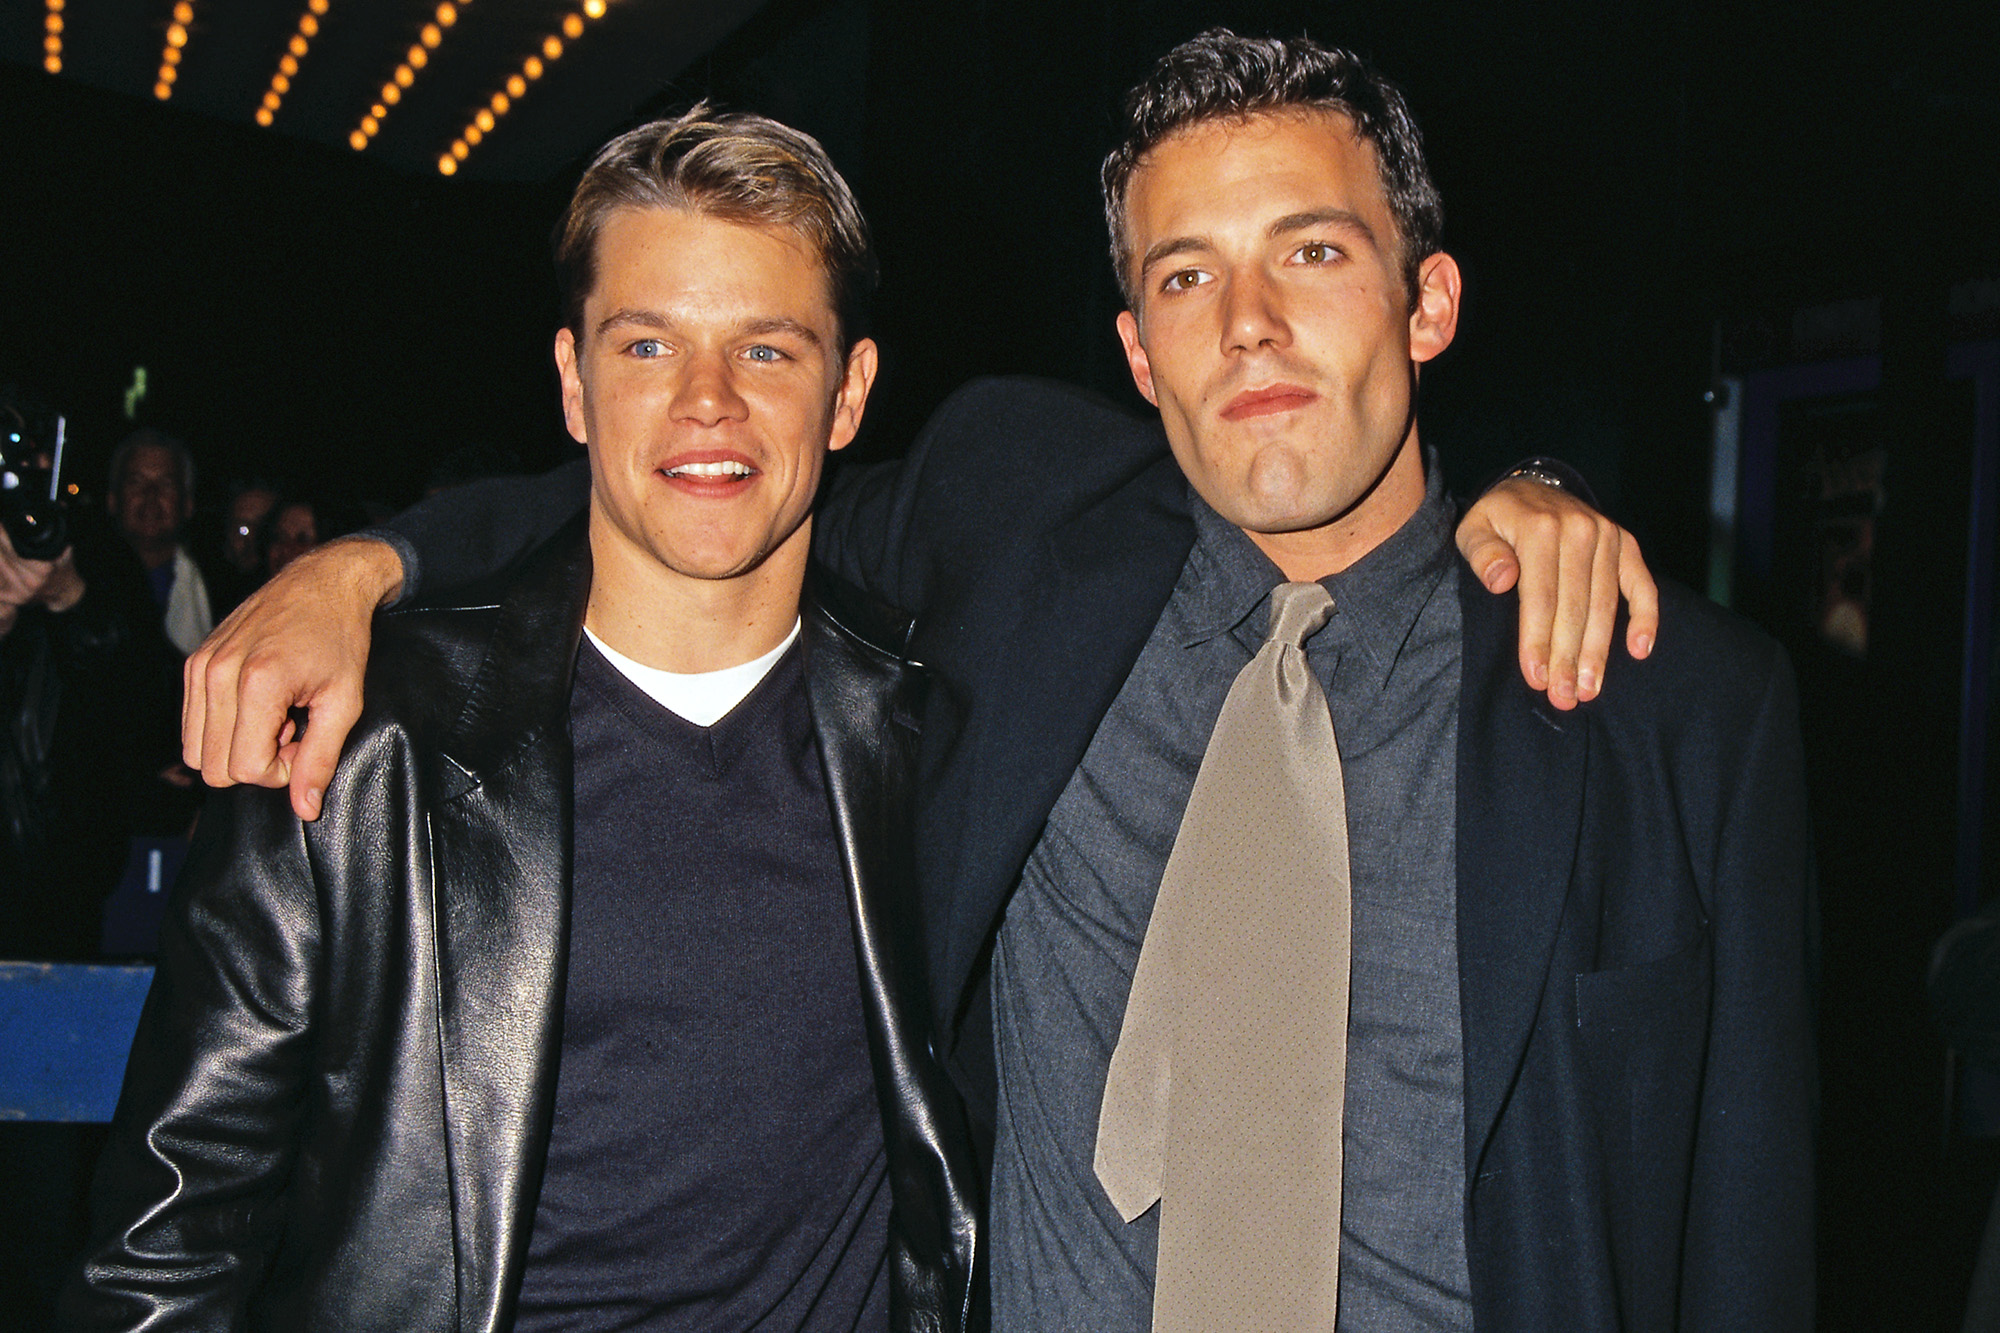 Matt Damon and Ben Affleck at the 'Good Will Hunting' premiere in 1997